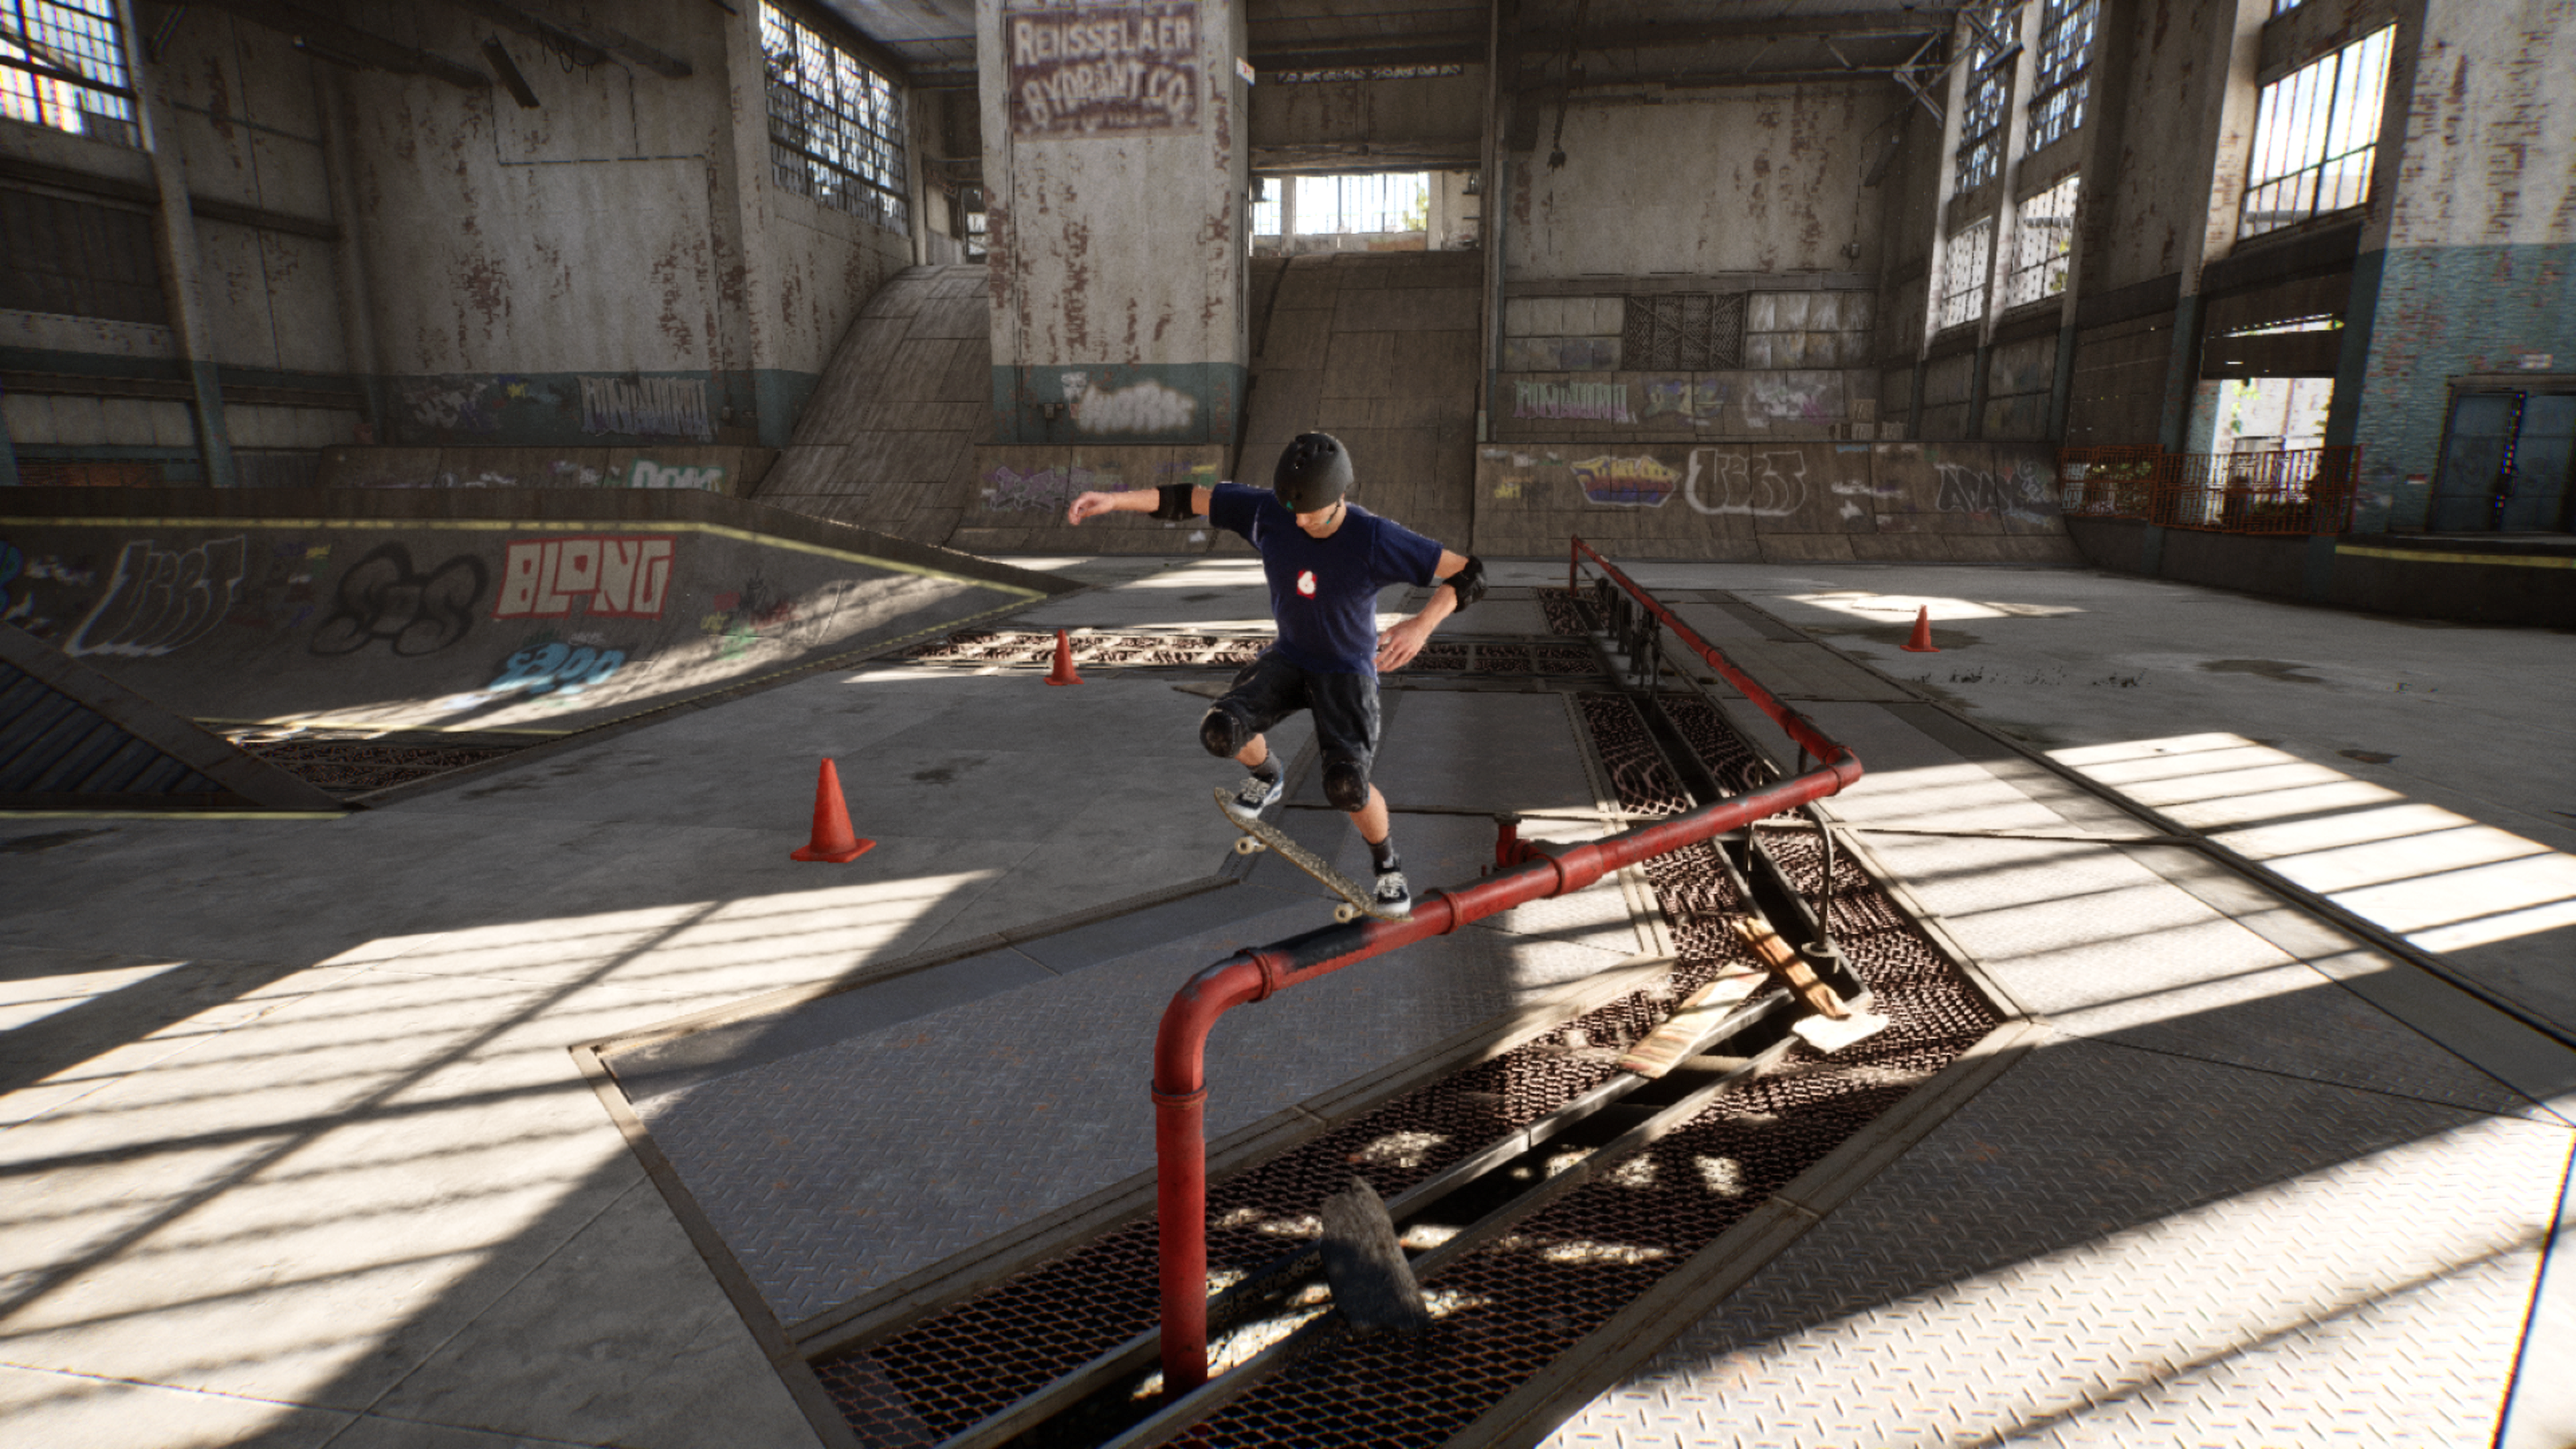 Tony Hawk's Pro Skater 1 + 2 Remasters Releasing This Year, Won't Have Microtransactions